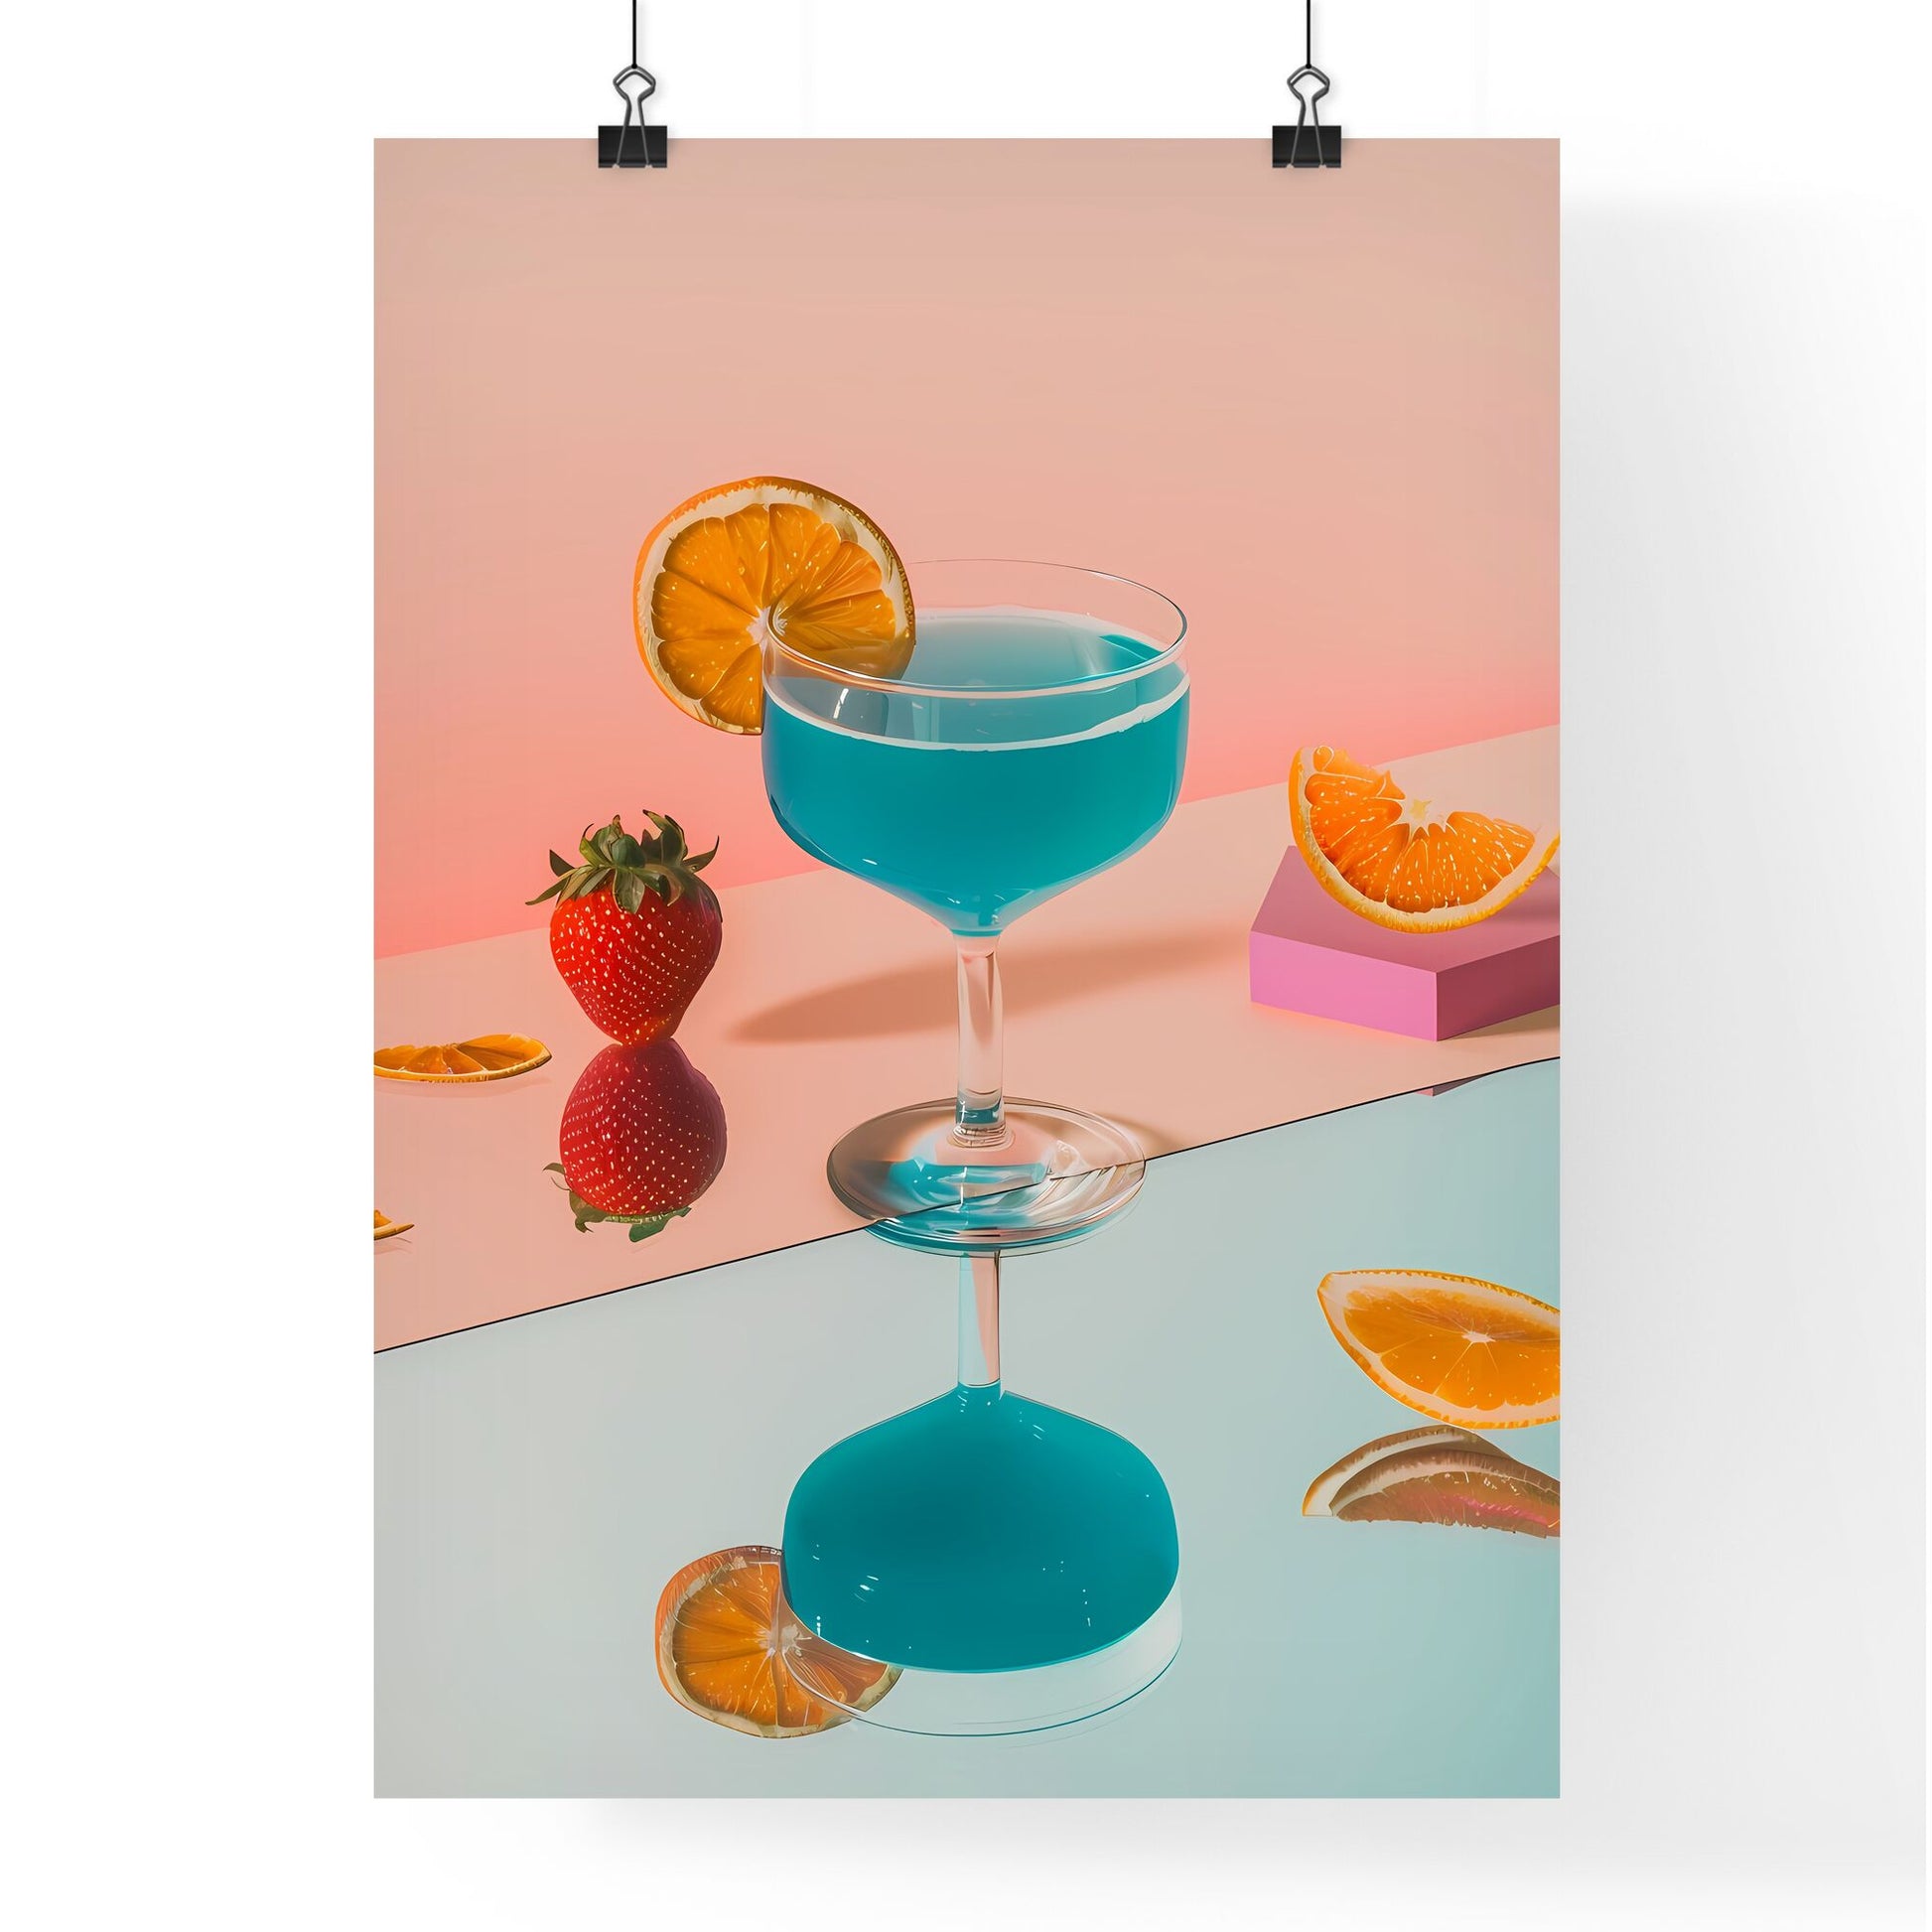 Isometric Perspective: Modern Still Life - Sleek and Vibrant Artistic Composition with Blue Drink, Dried Orange Slice, and Minimalist Setup Default Title